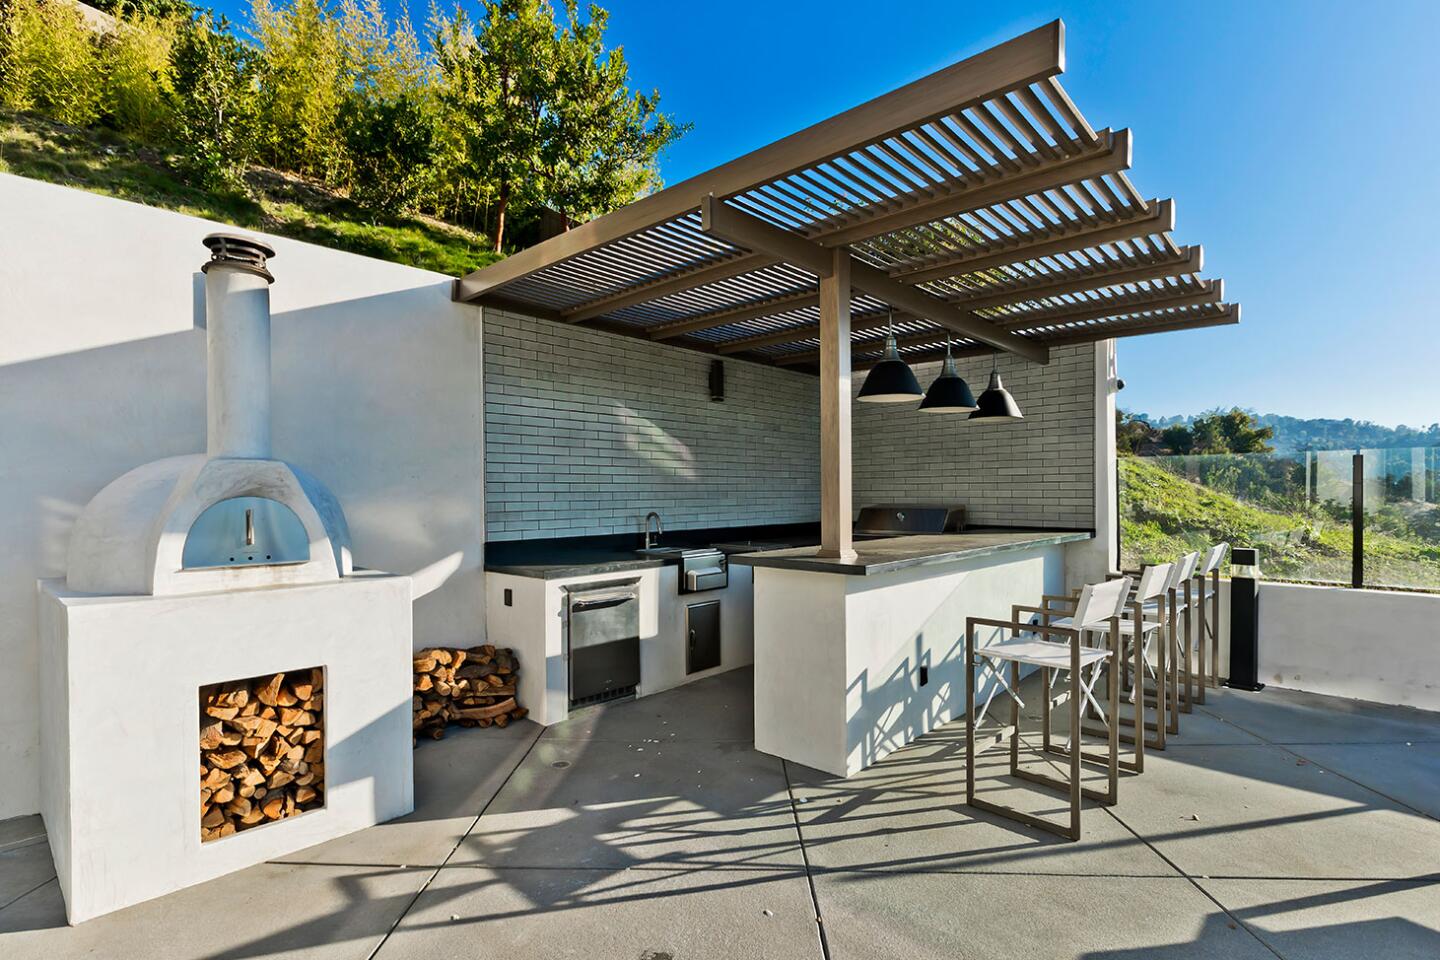 The outdoor kitchen has a pizza oven.